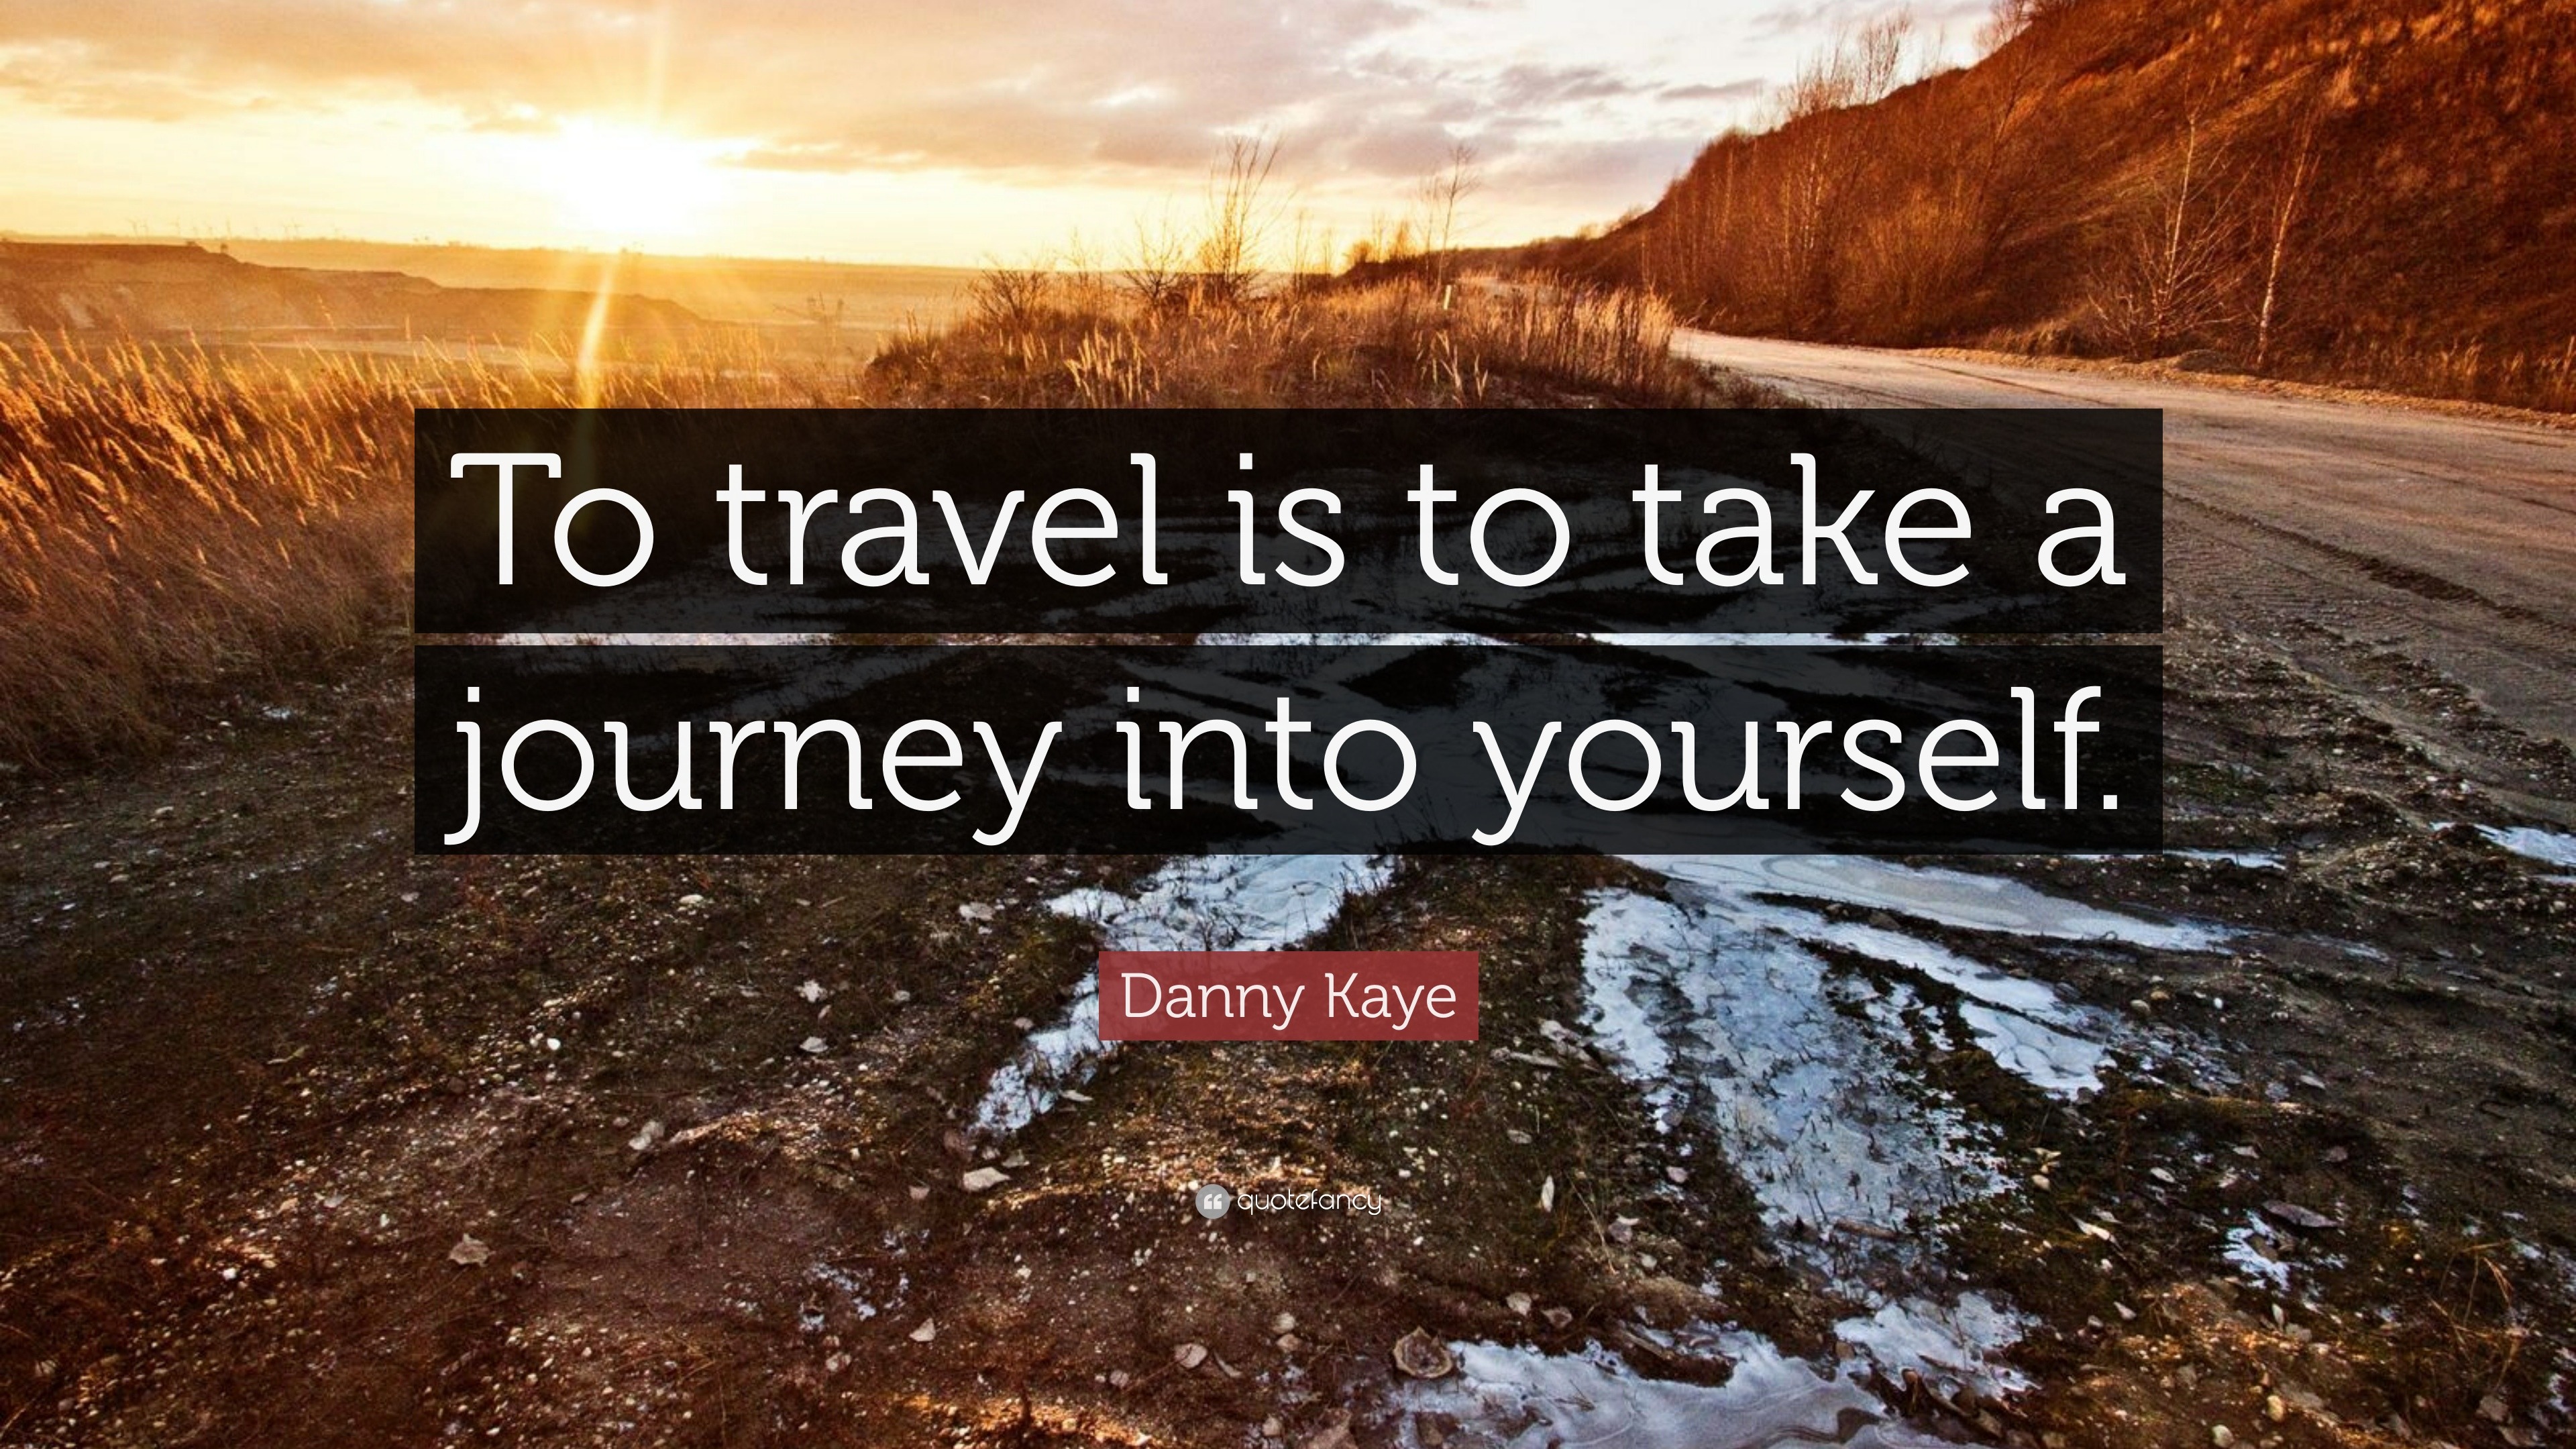 travel is to take a journey into yourself